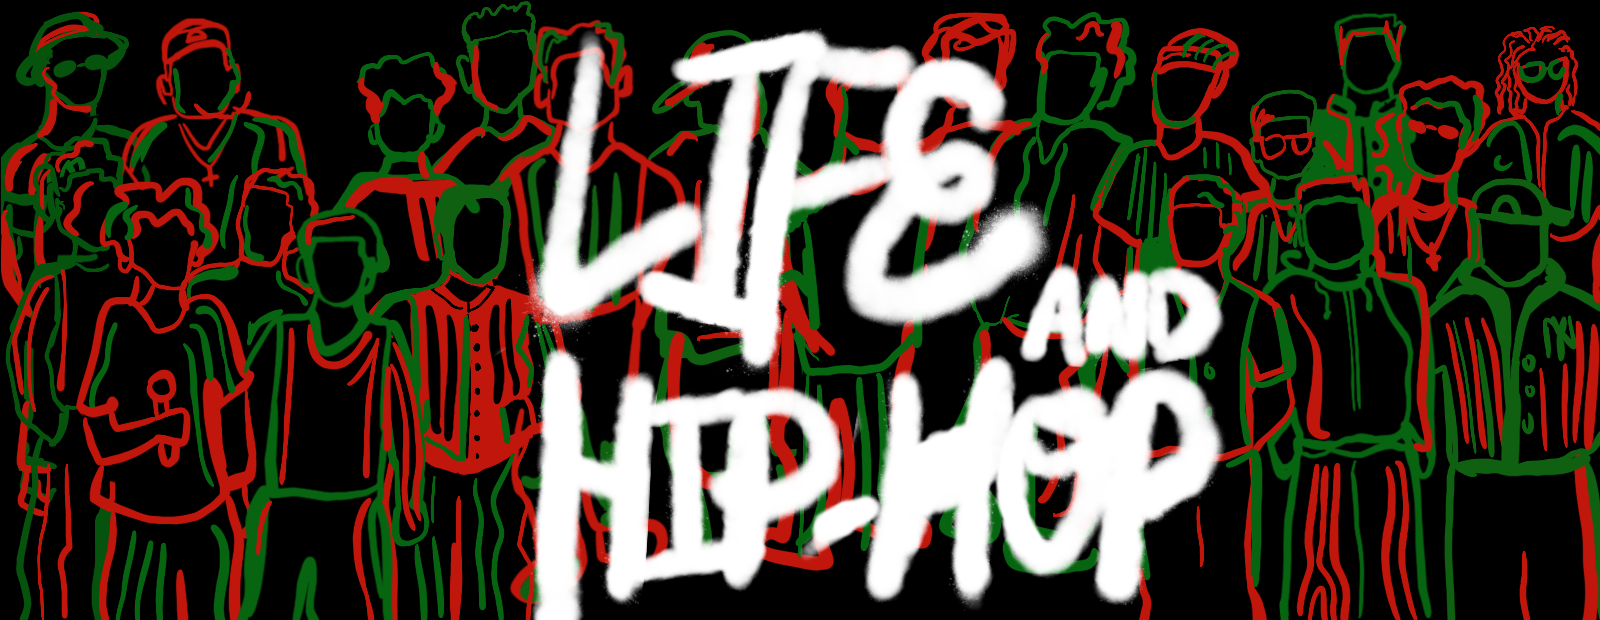 what characterized the early hip hop culture